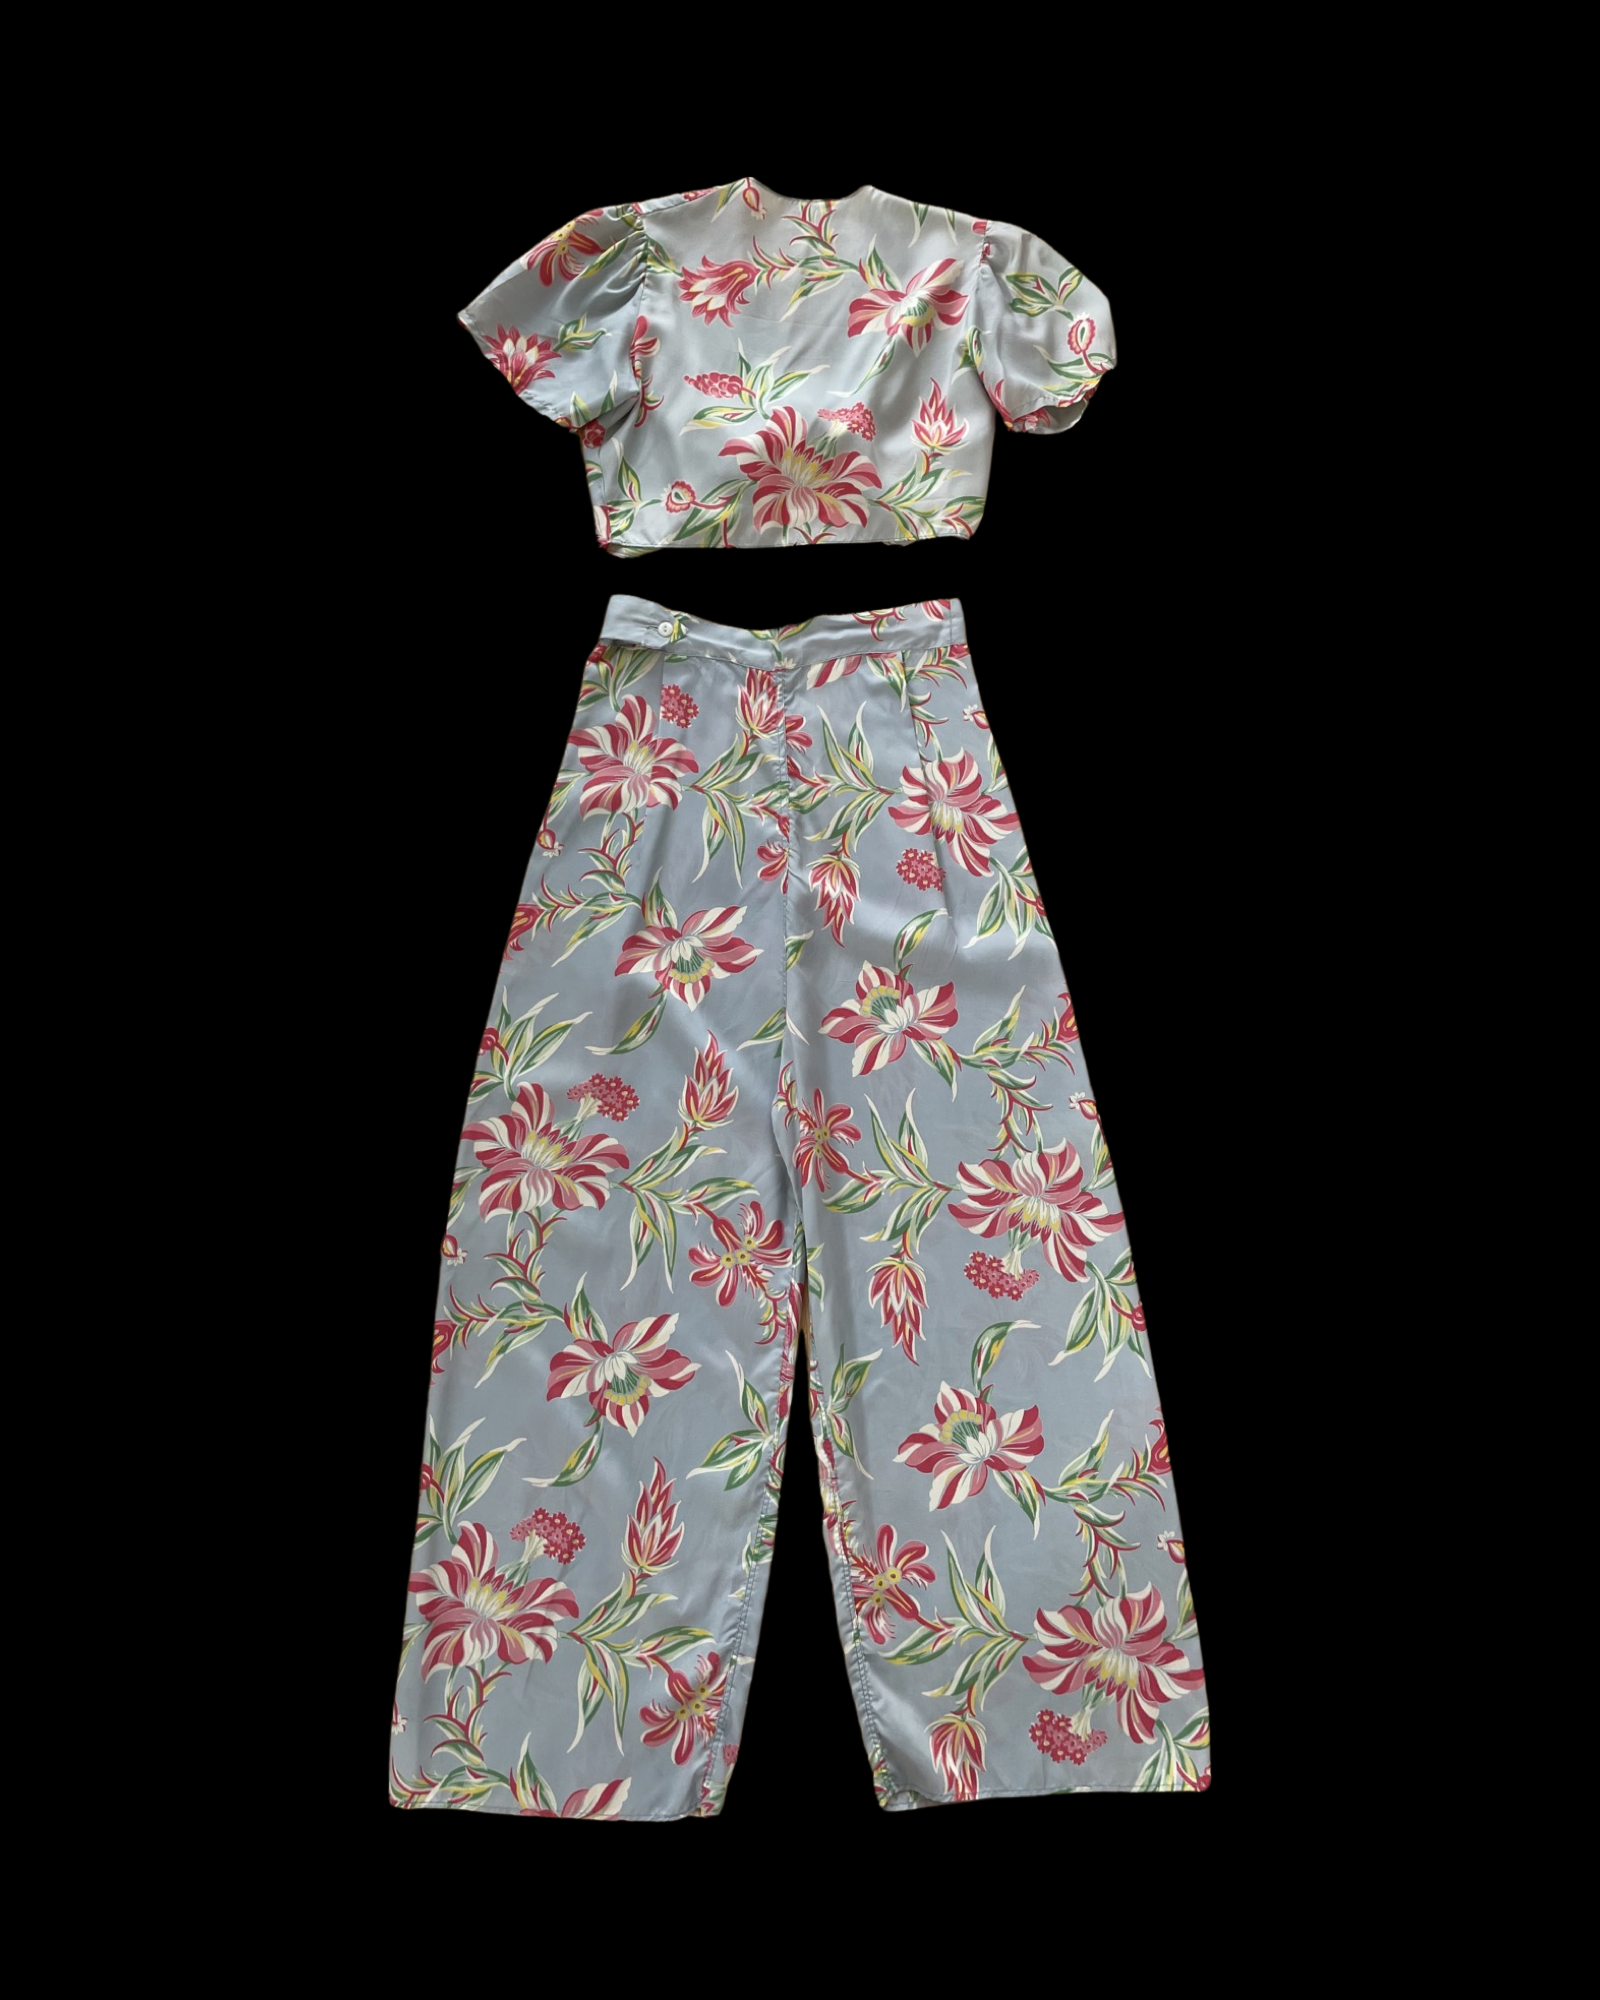 1940s Rayon Two Piece Floral Side Button Lounge Suit